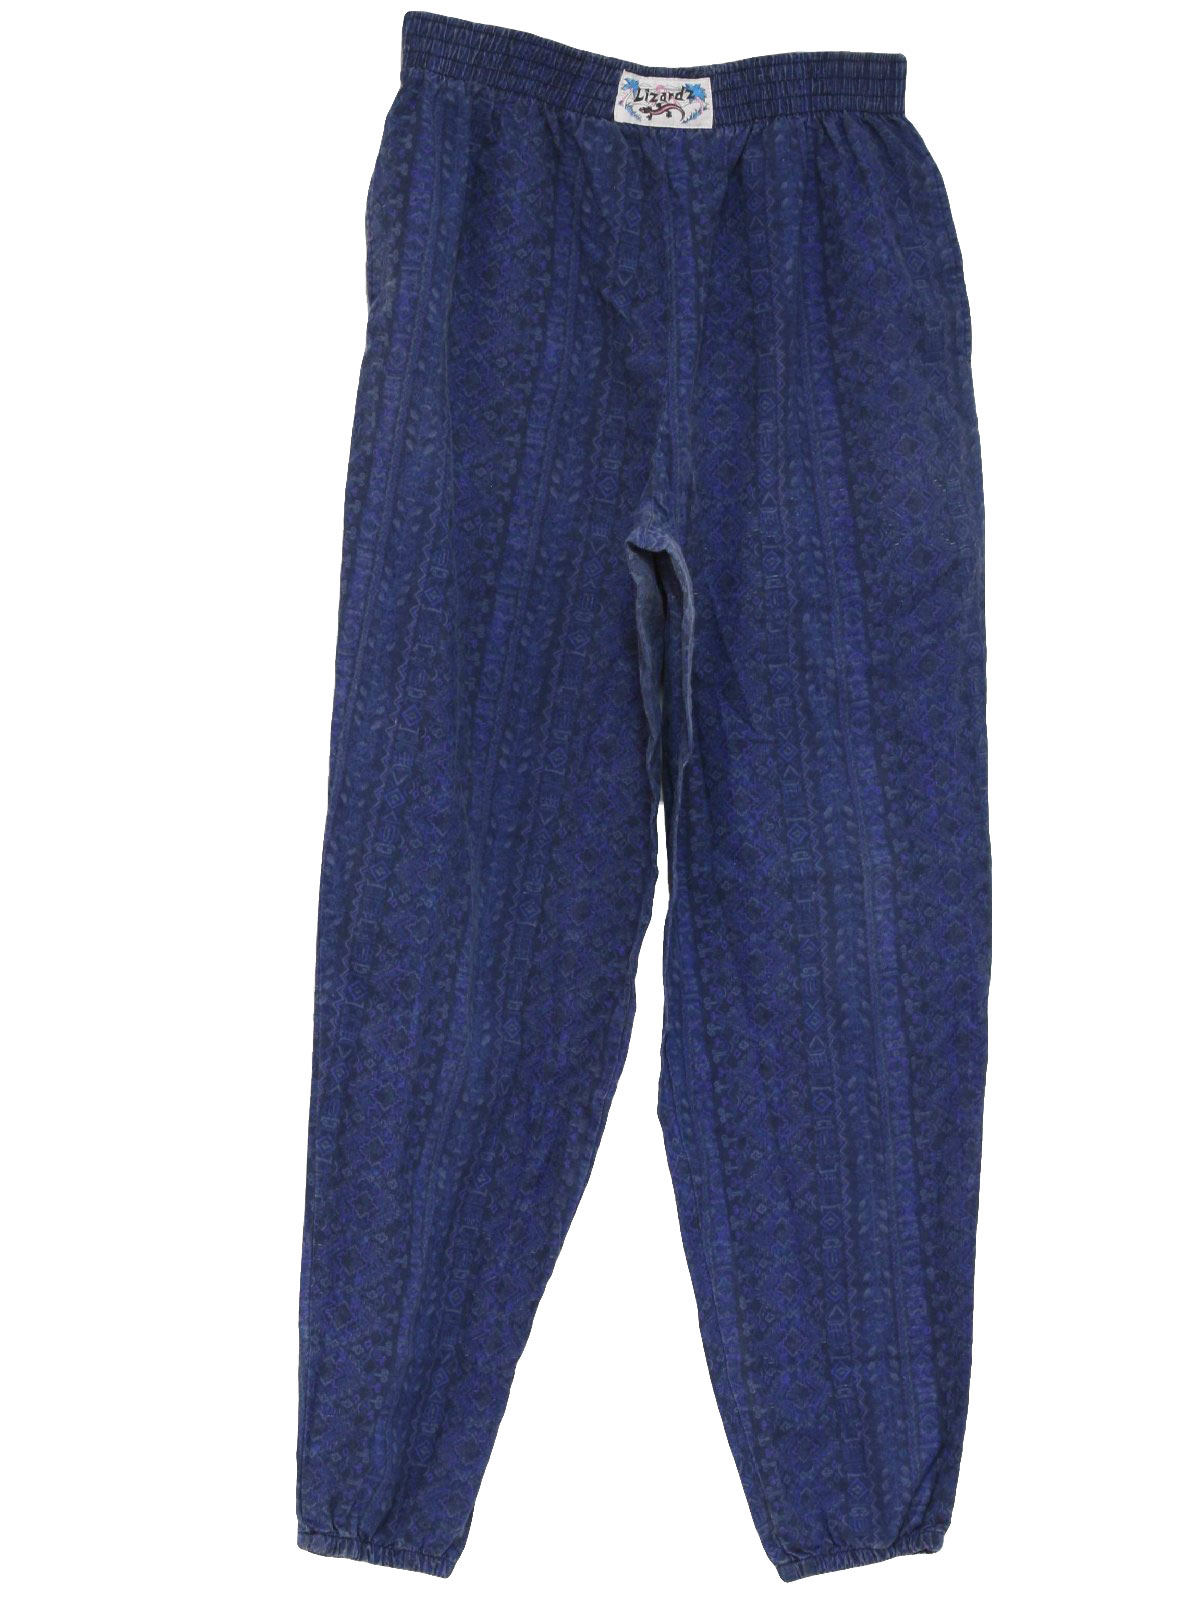 Lizard 80's Vintage Pants: 80s -Lizard- Mens shaded blue, grey and ...